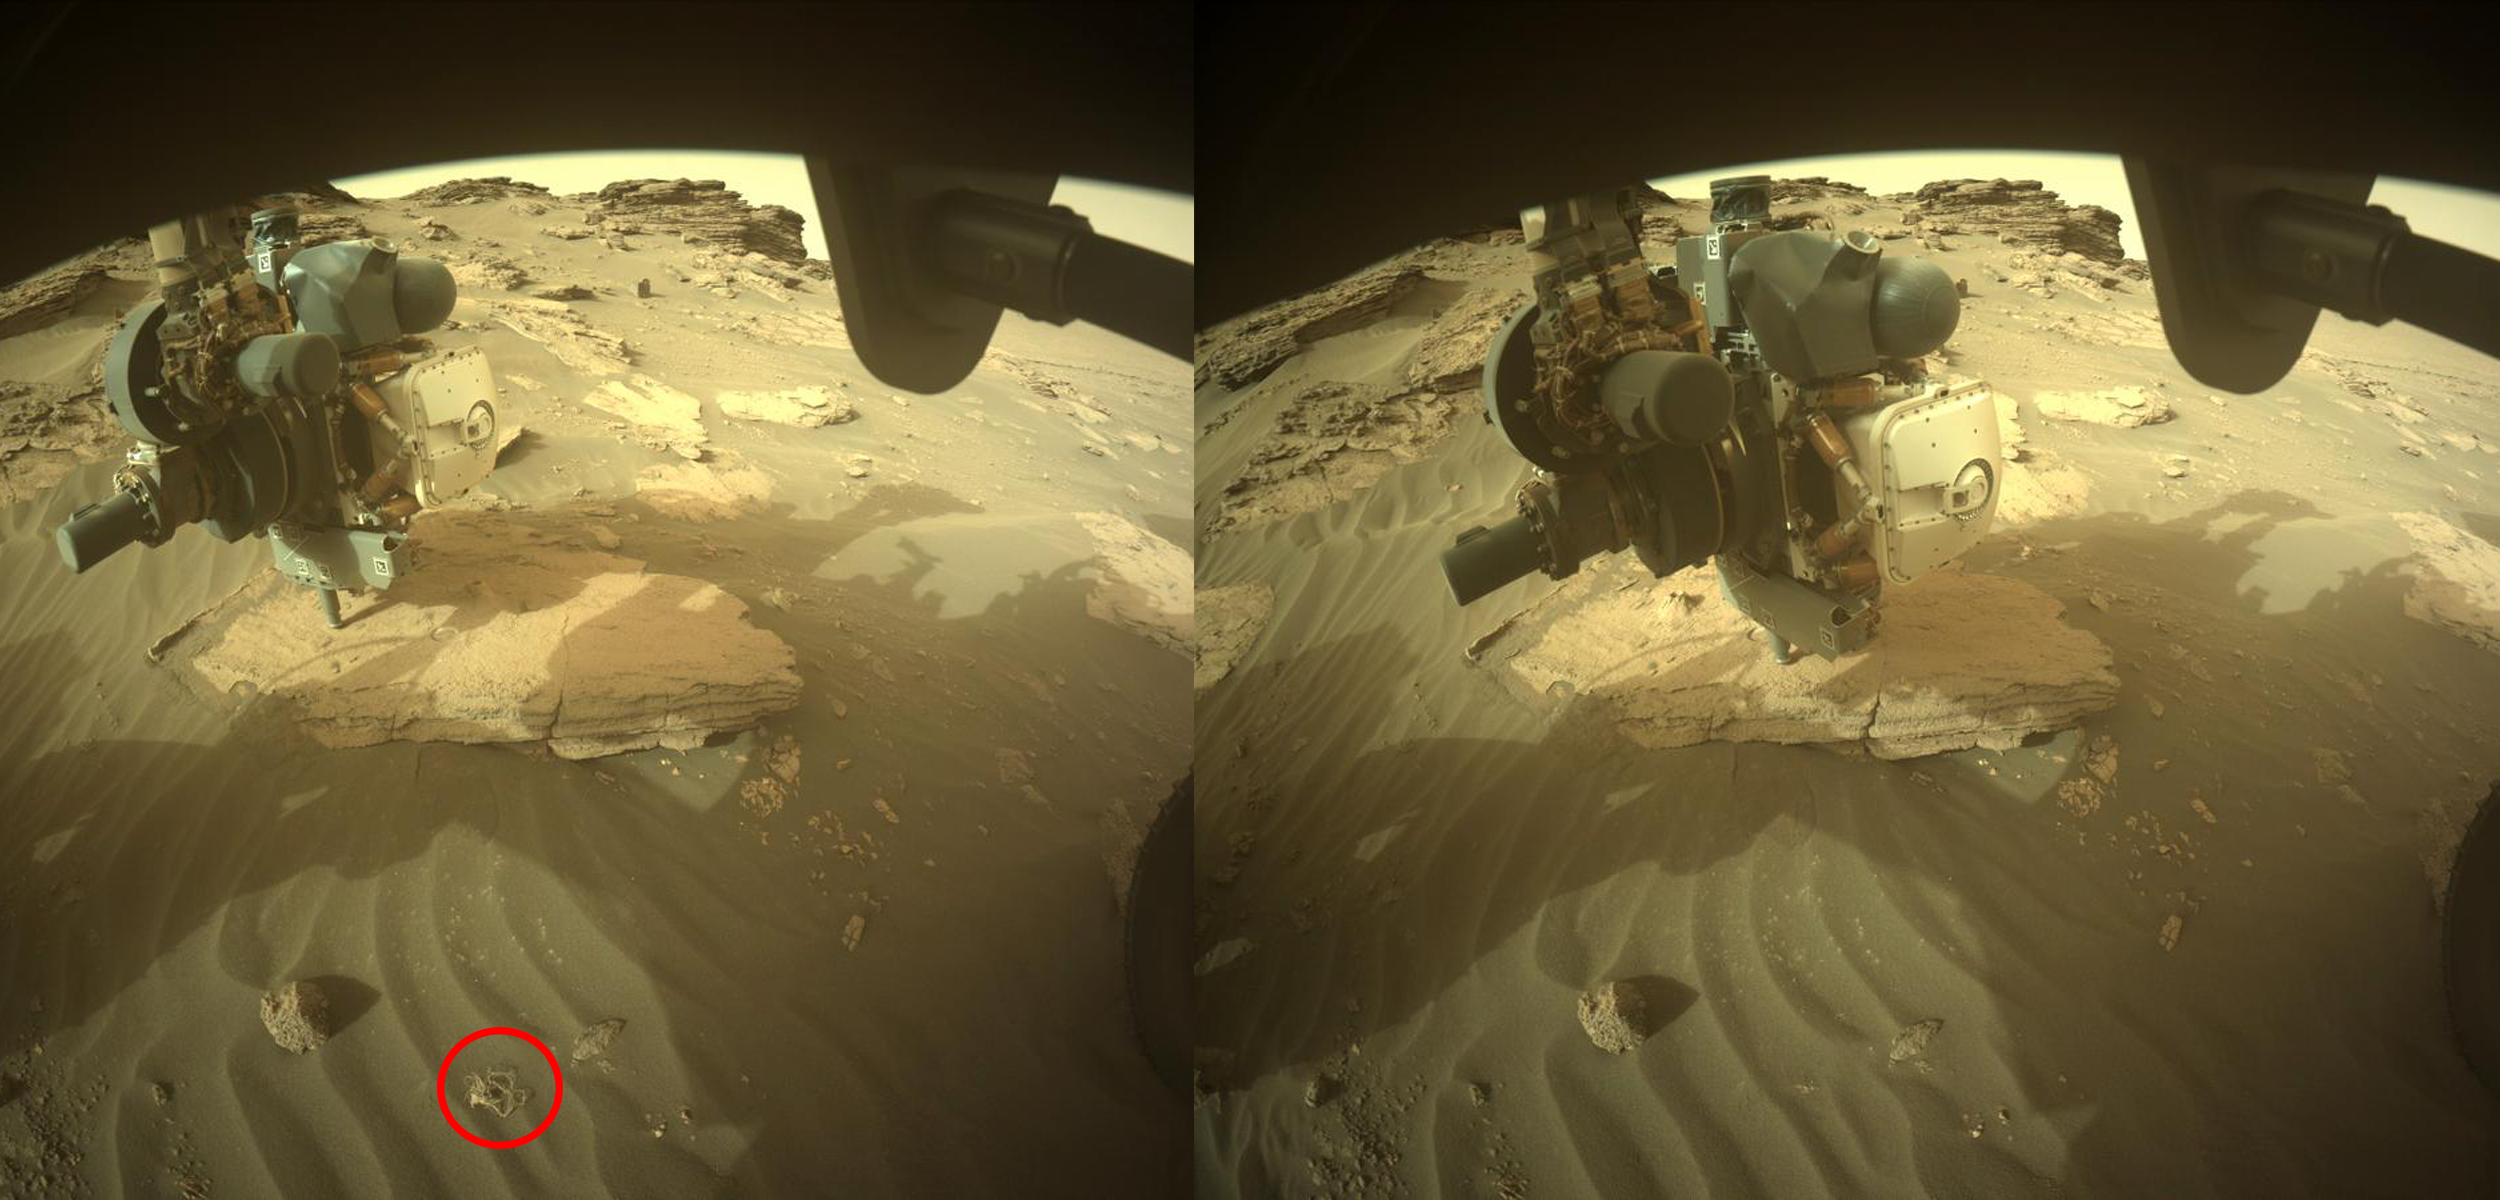 Images of Perseverance showing the object on the left, and the object gone on the right. NASA.